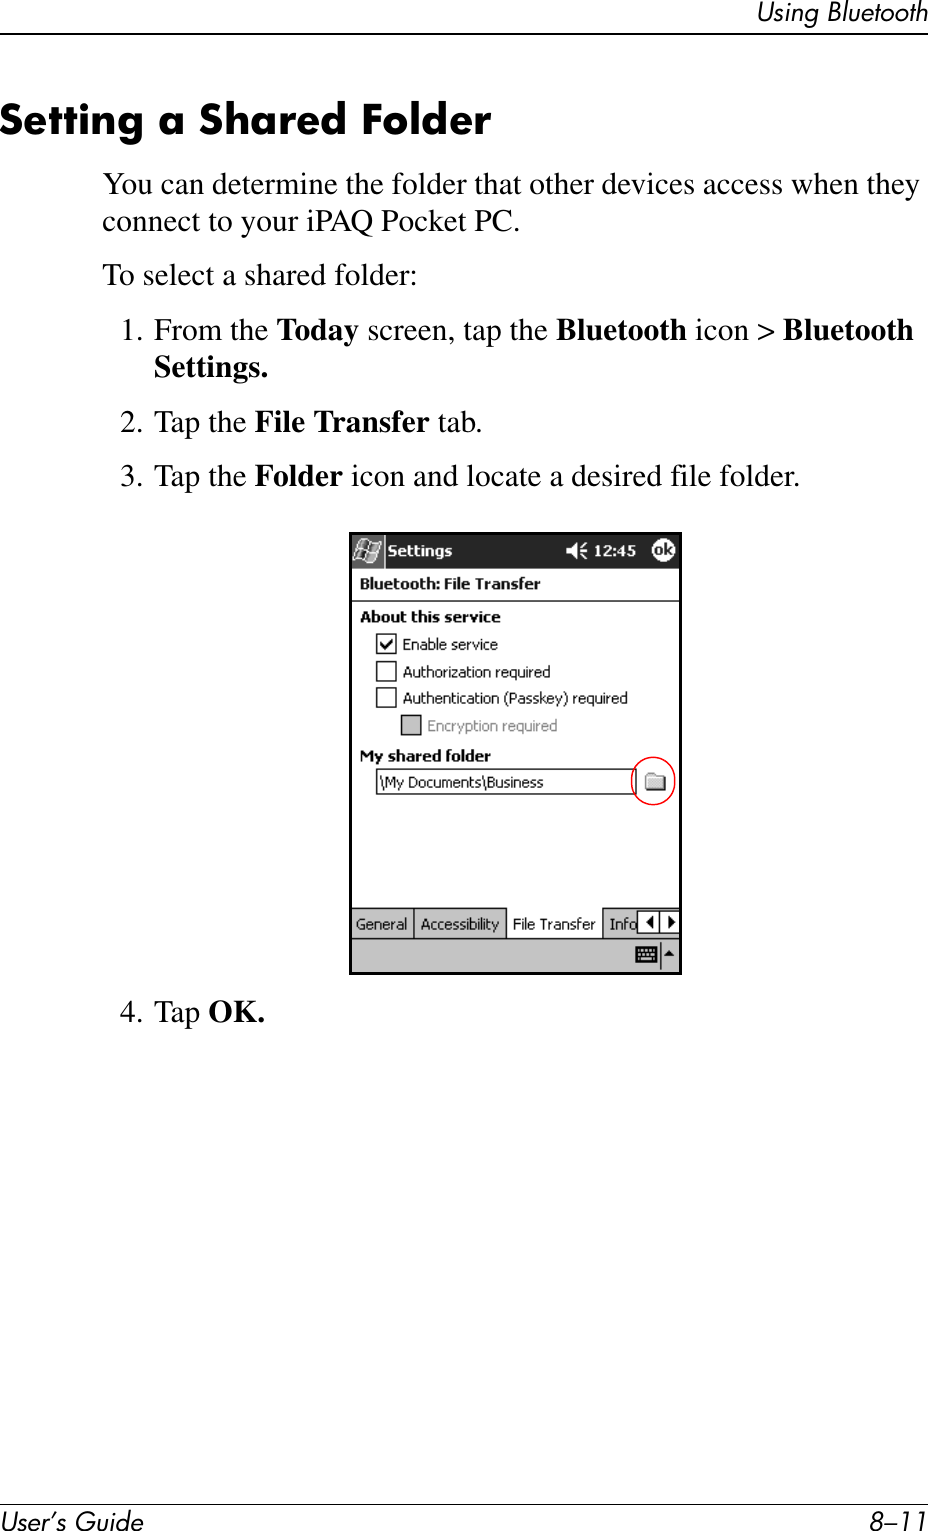 Using BluetoothUser’s Guide 8–11Setting a Shared FolderYou can determine the folder that other devices access when they connect to your iPAQ Pocket PC.To select a shared folder:1. From the Today screen, tap the Bluetooth icon &gt; Bluetooth Settings.2. Tap the File Transfer tab.3. Tap the Folder icon and locate a desired file folder.4. Tap OK.